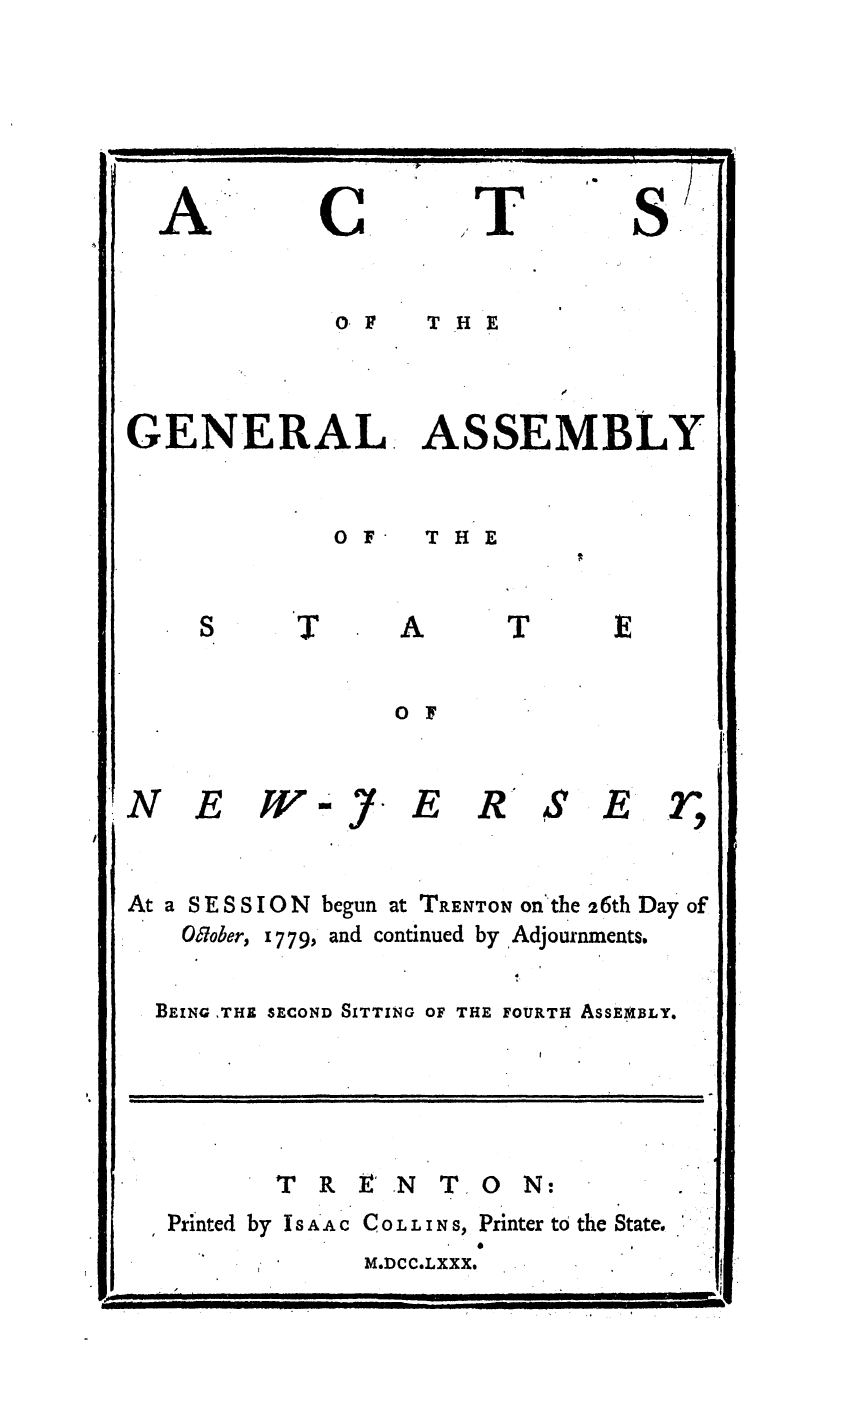 handle is hein.ssl/ssnj0228 and id is 1 raw text is: A

C

T

S

O. F  THE
GENERAL. ASSEMBLY

0 F

THE

O F

N E

W 

7-

E

RS

E r

At a SESSI
OWober,

[ON

begun at TRENTON on'the 26th Day of

1 779, and continued by Adjournments.

BEING ,THE SECOND SITTING OF THE FOURTH ASSEMBLY.

TREN TON:
Printed by ISA'AC COLLINS, Printer to the State.

M.DCC.LXXX.

F-                                                                                                                                                                ' It

k

,,,            ,,,,,  ,  ,  :,                  , ,,  ,,


